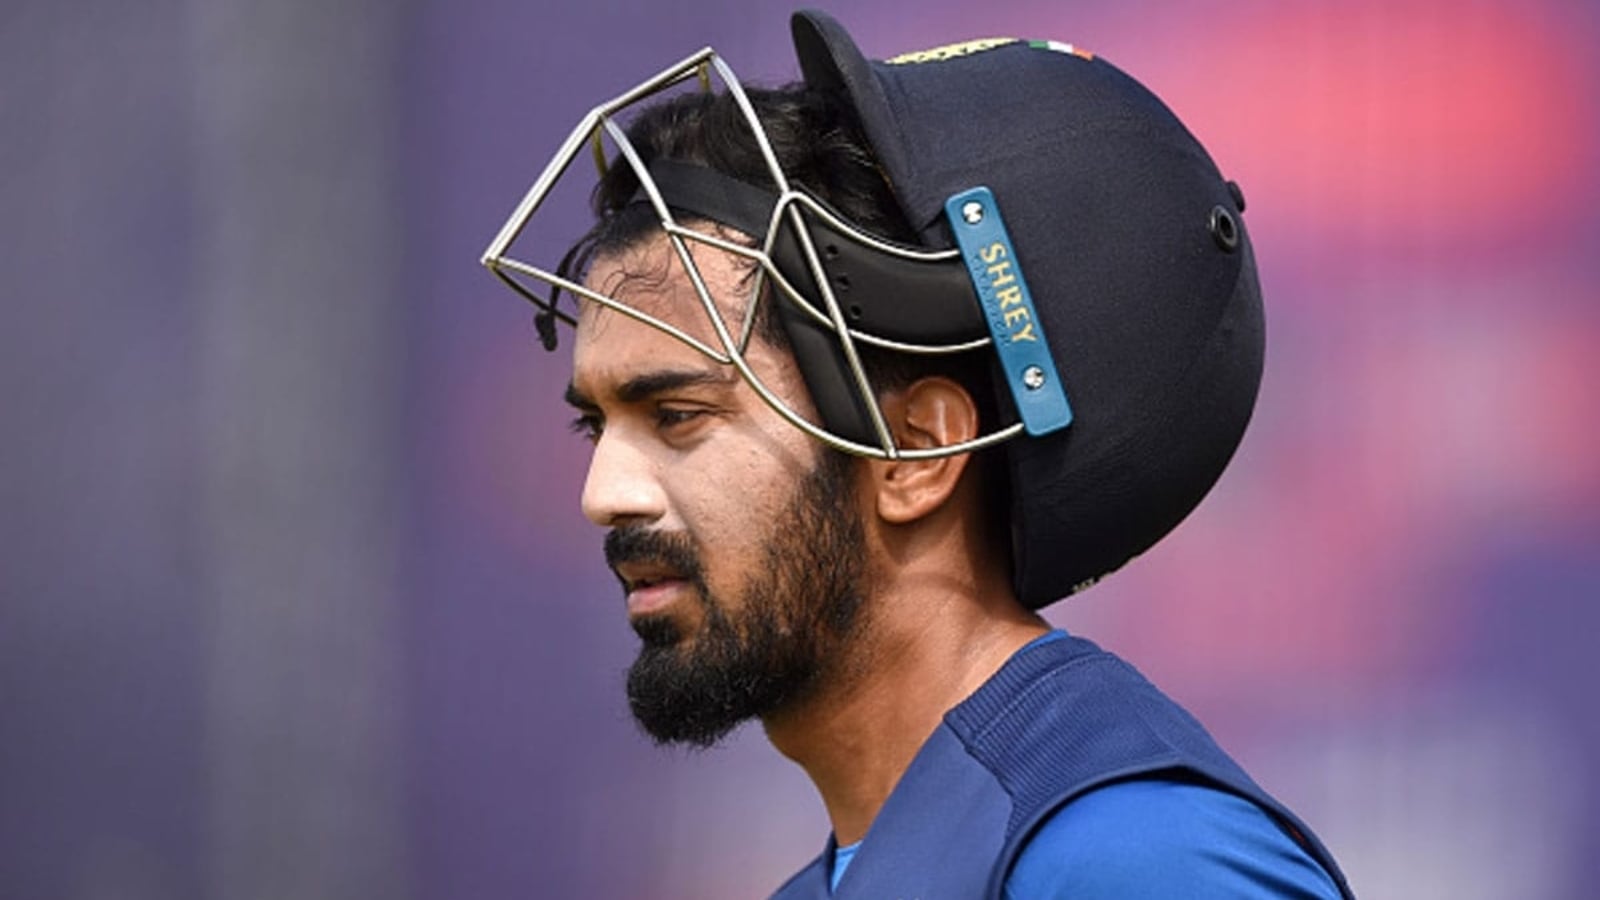 KL Rahul Drops Broken Heart Emoji After India's T20 World Cup Exit